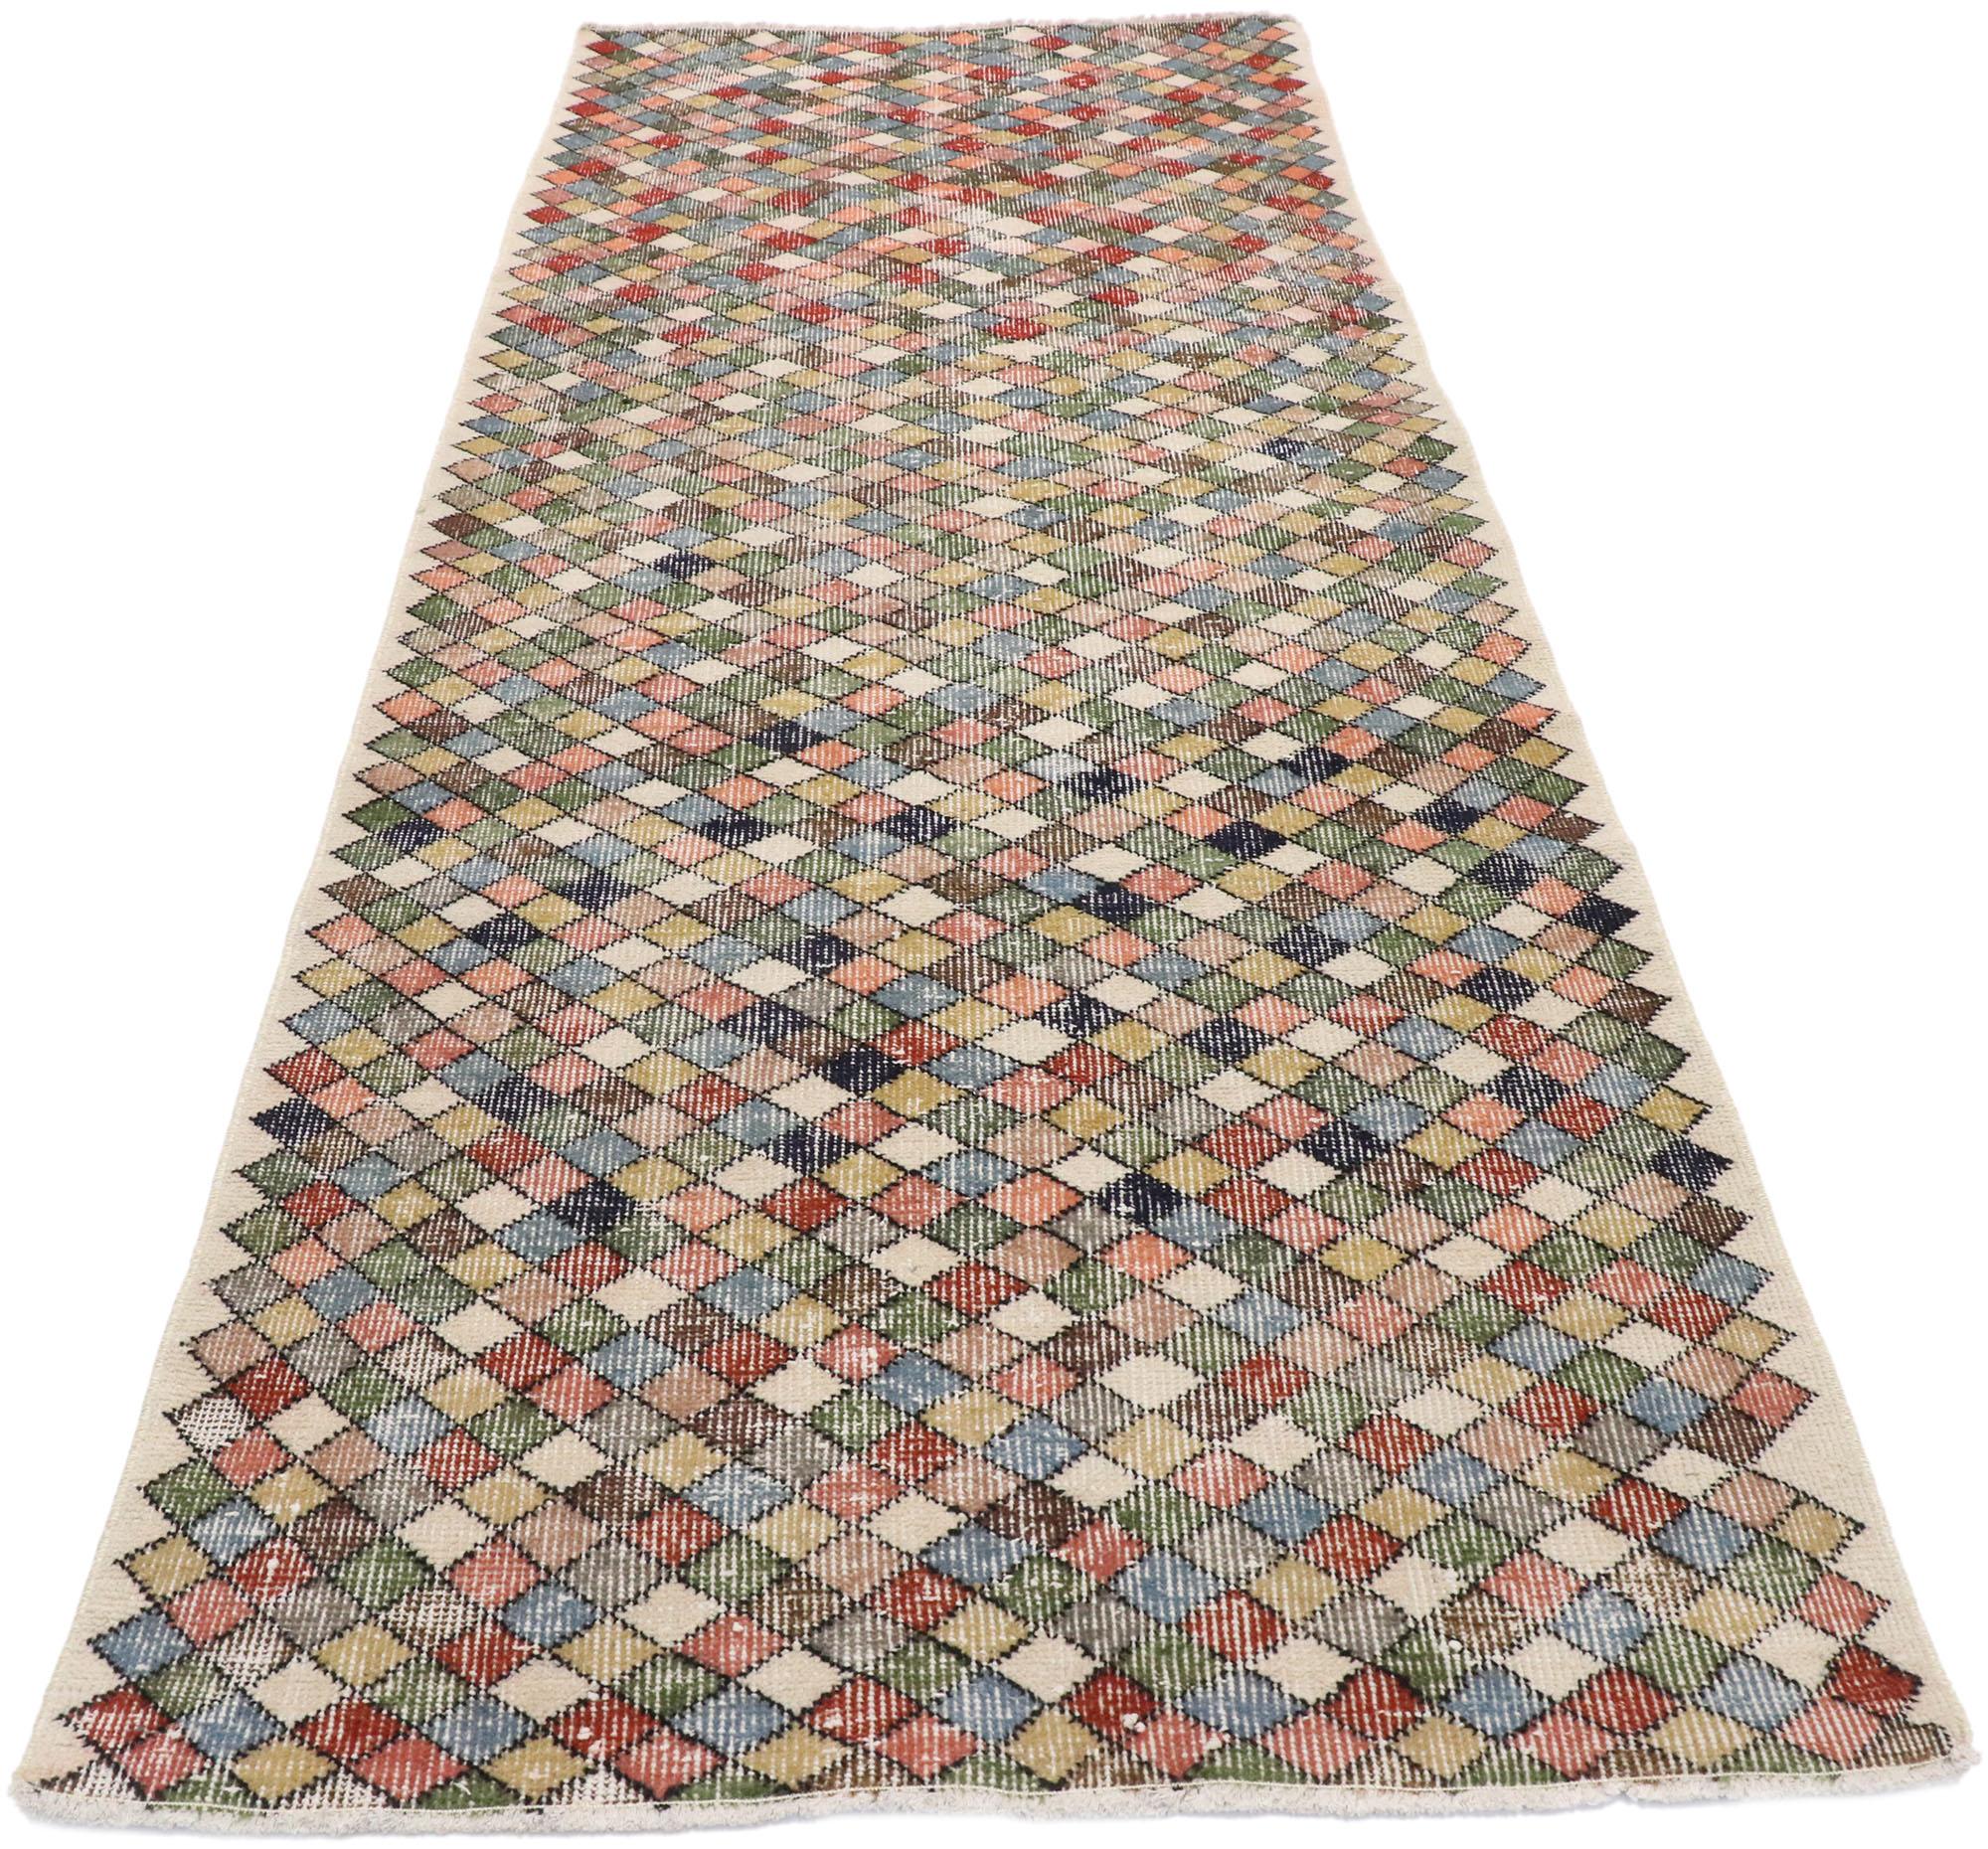 Distressed Vintage Turkish Sivas Rug with Rustic Cubist Style In Distressed Condition For Sale In Dallas, TX